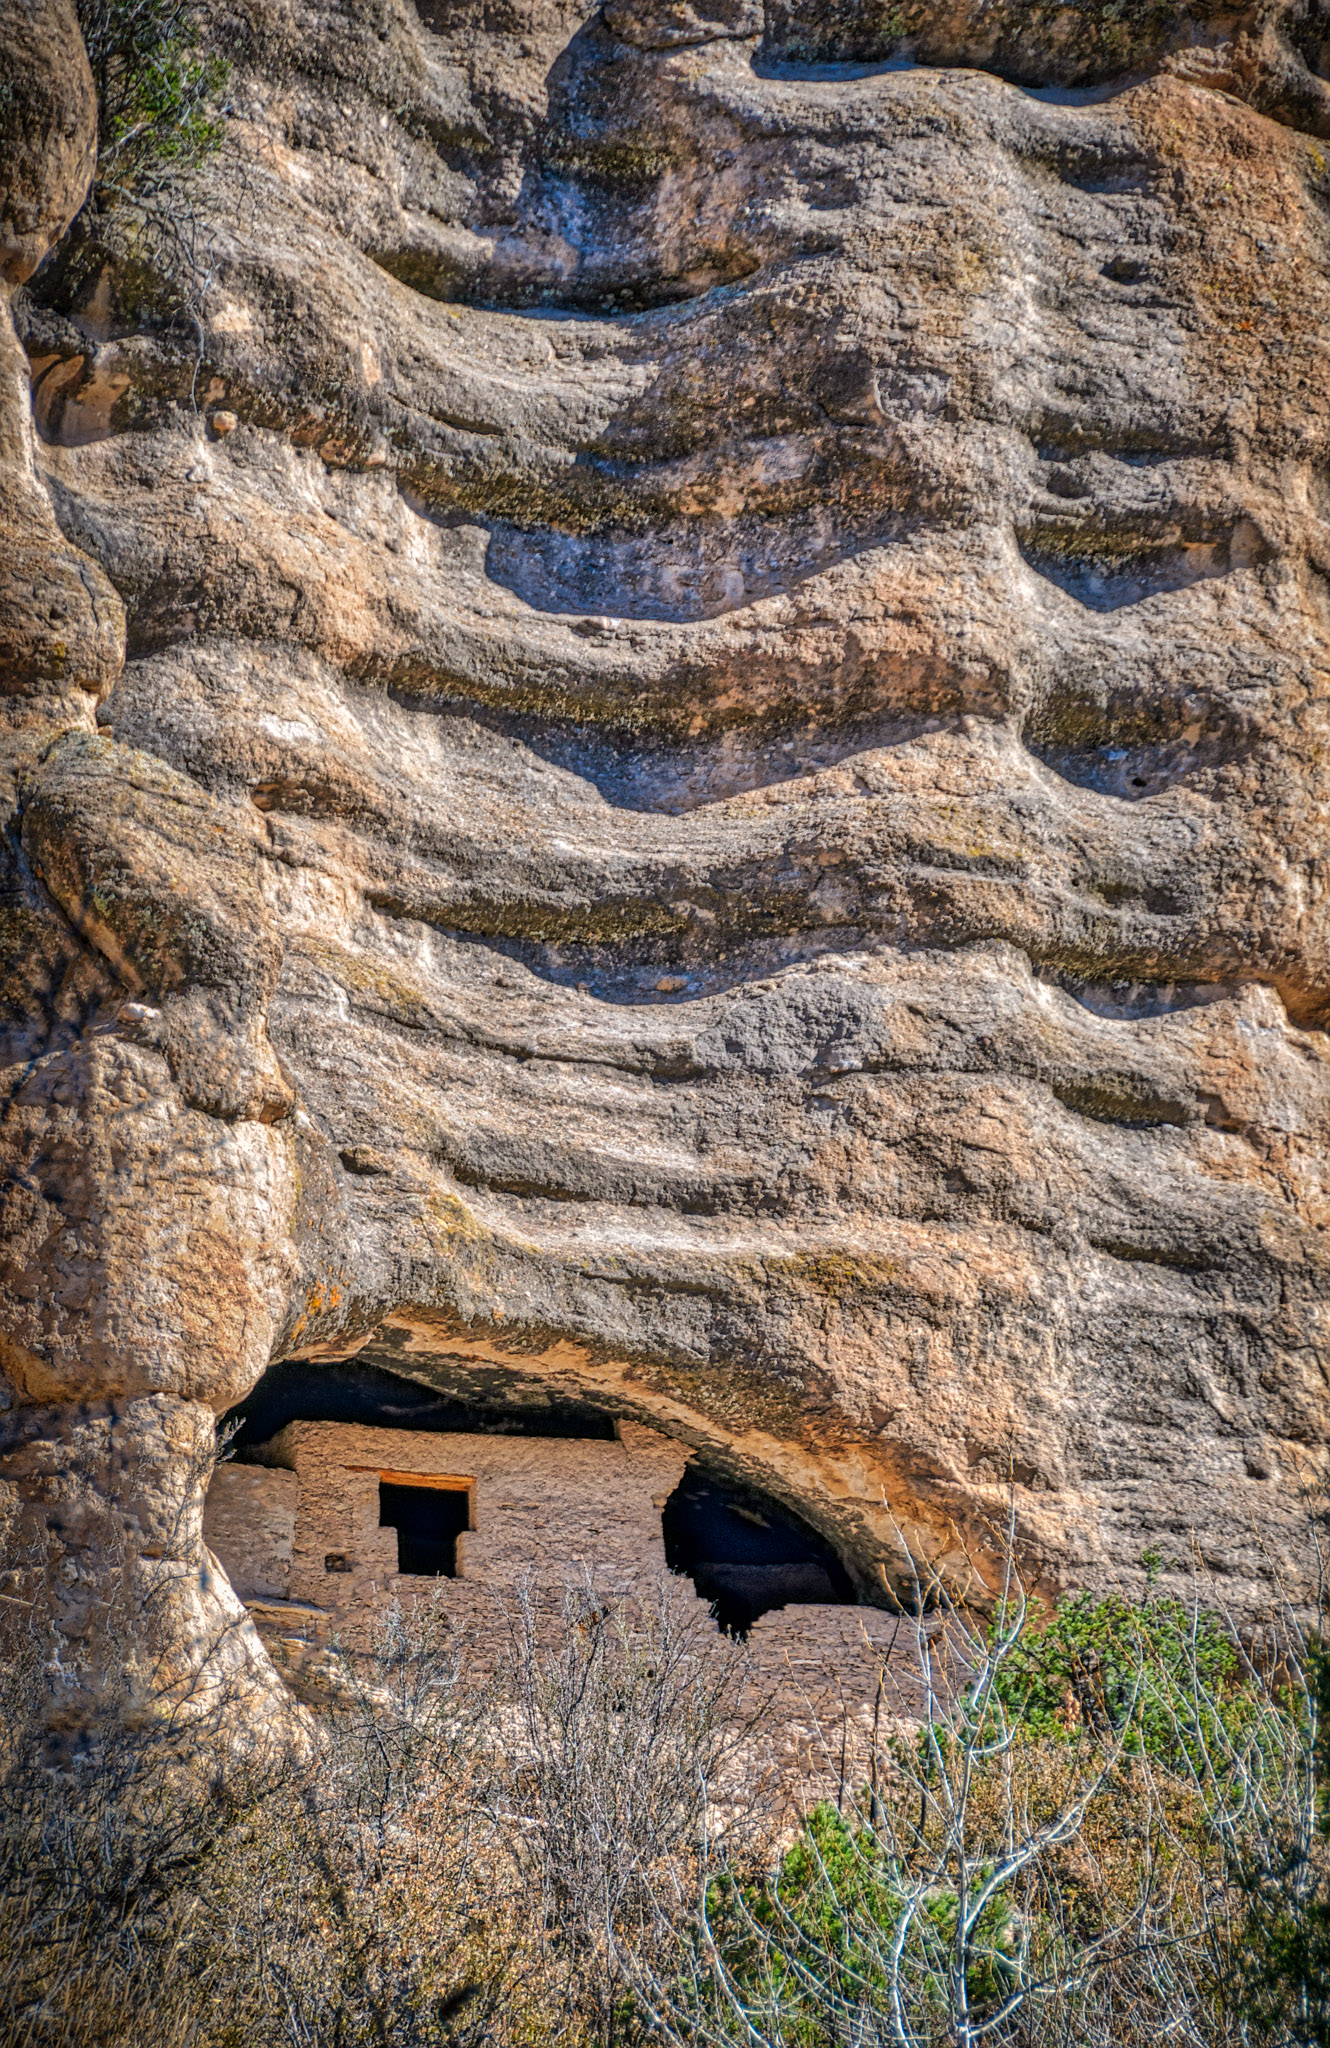 Mogollon structure at Gila Cliff Dwellings National Monument in New Mexico.